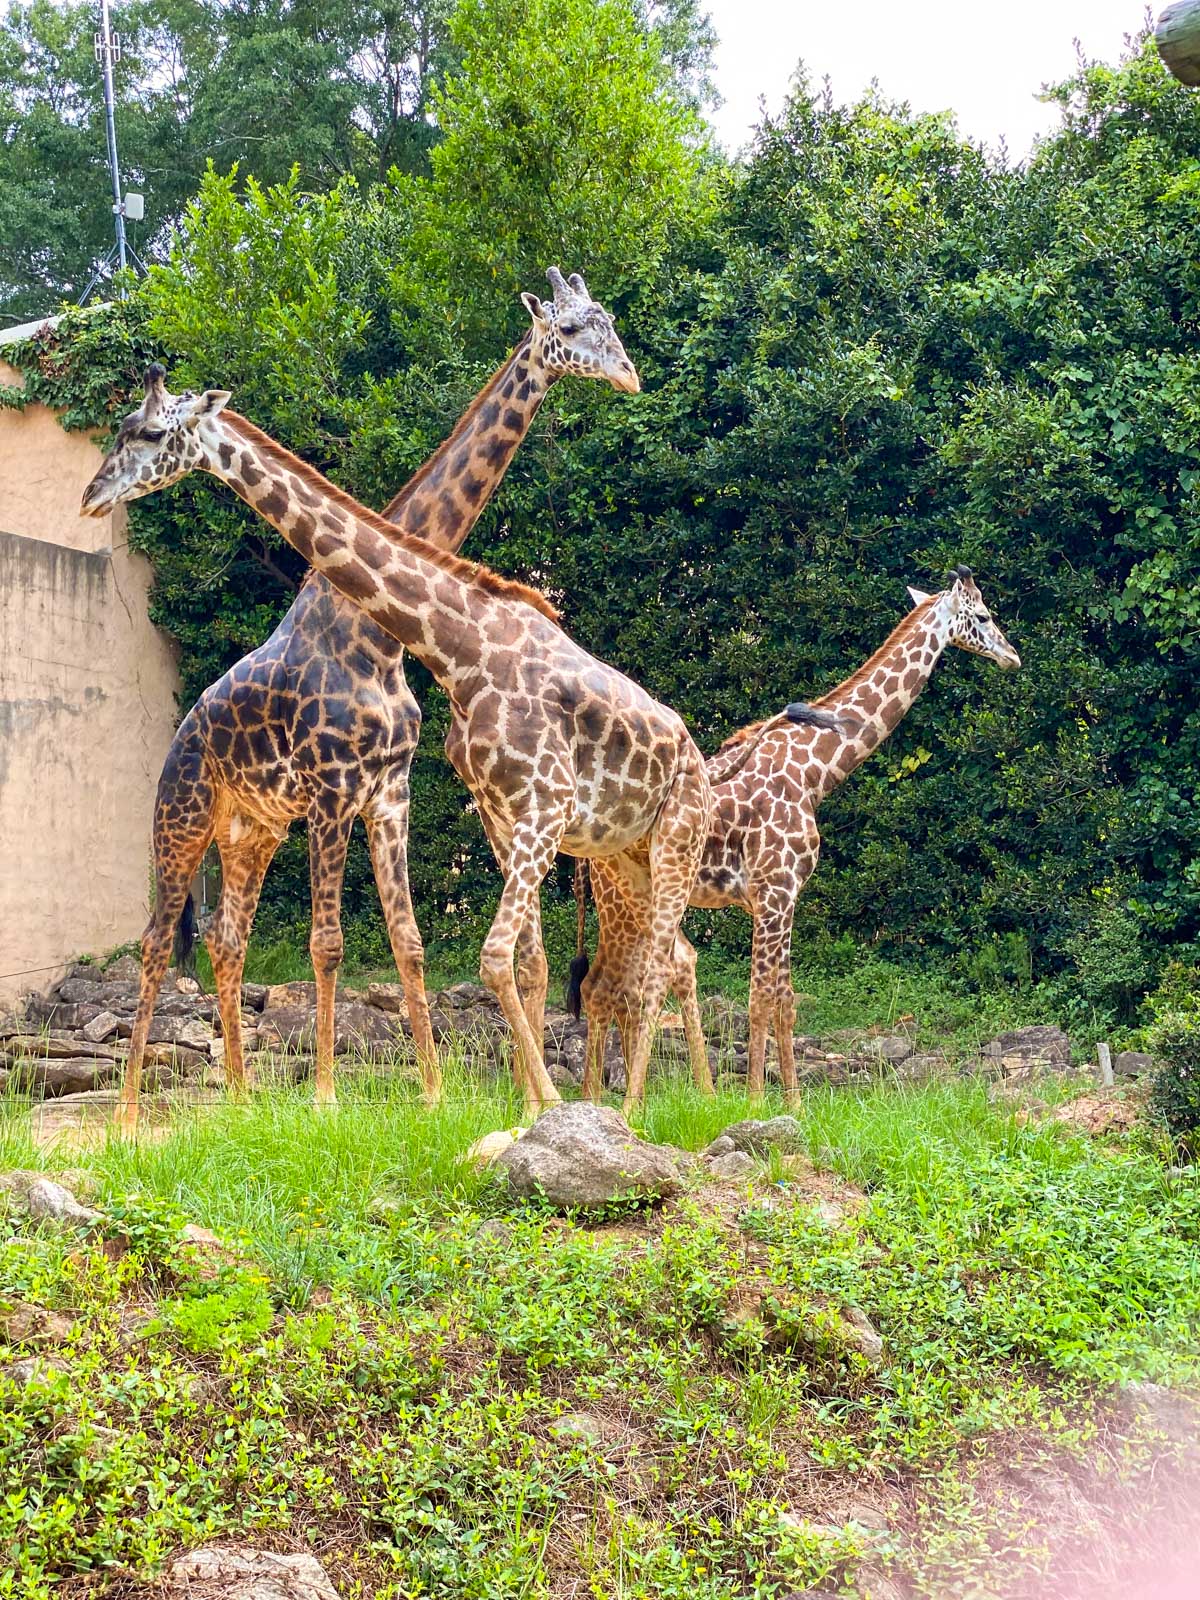 A family of giraffes at the Greenville Zoo.